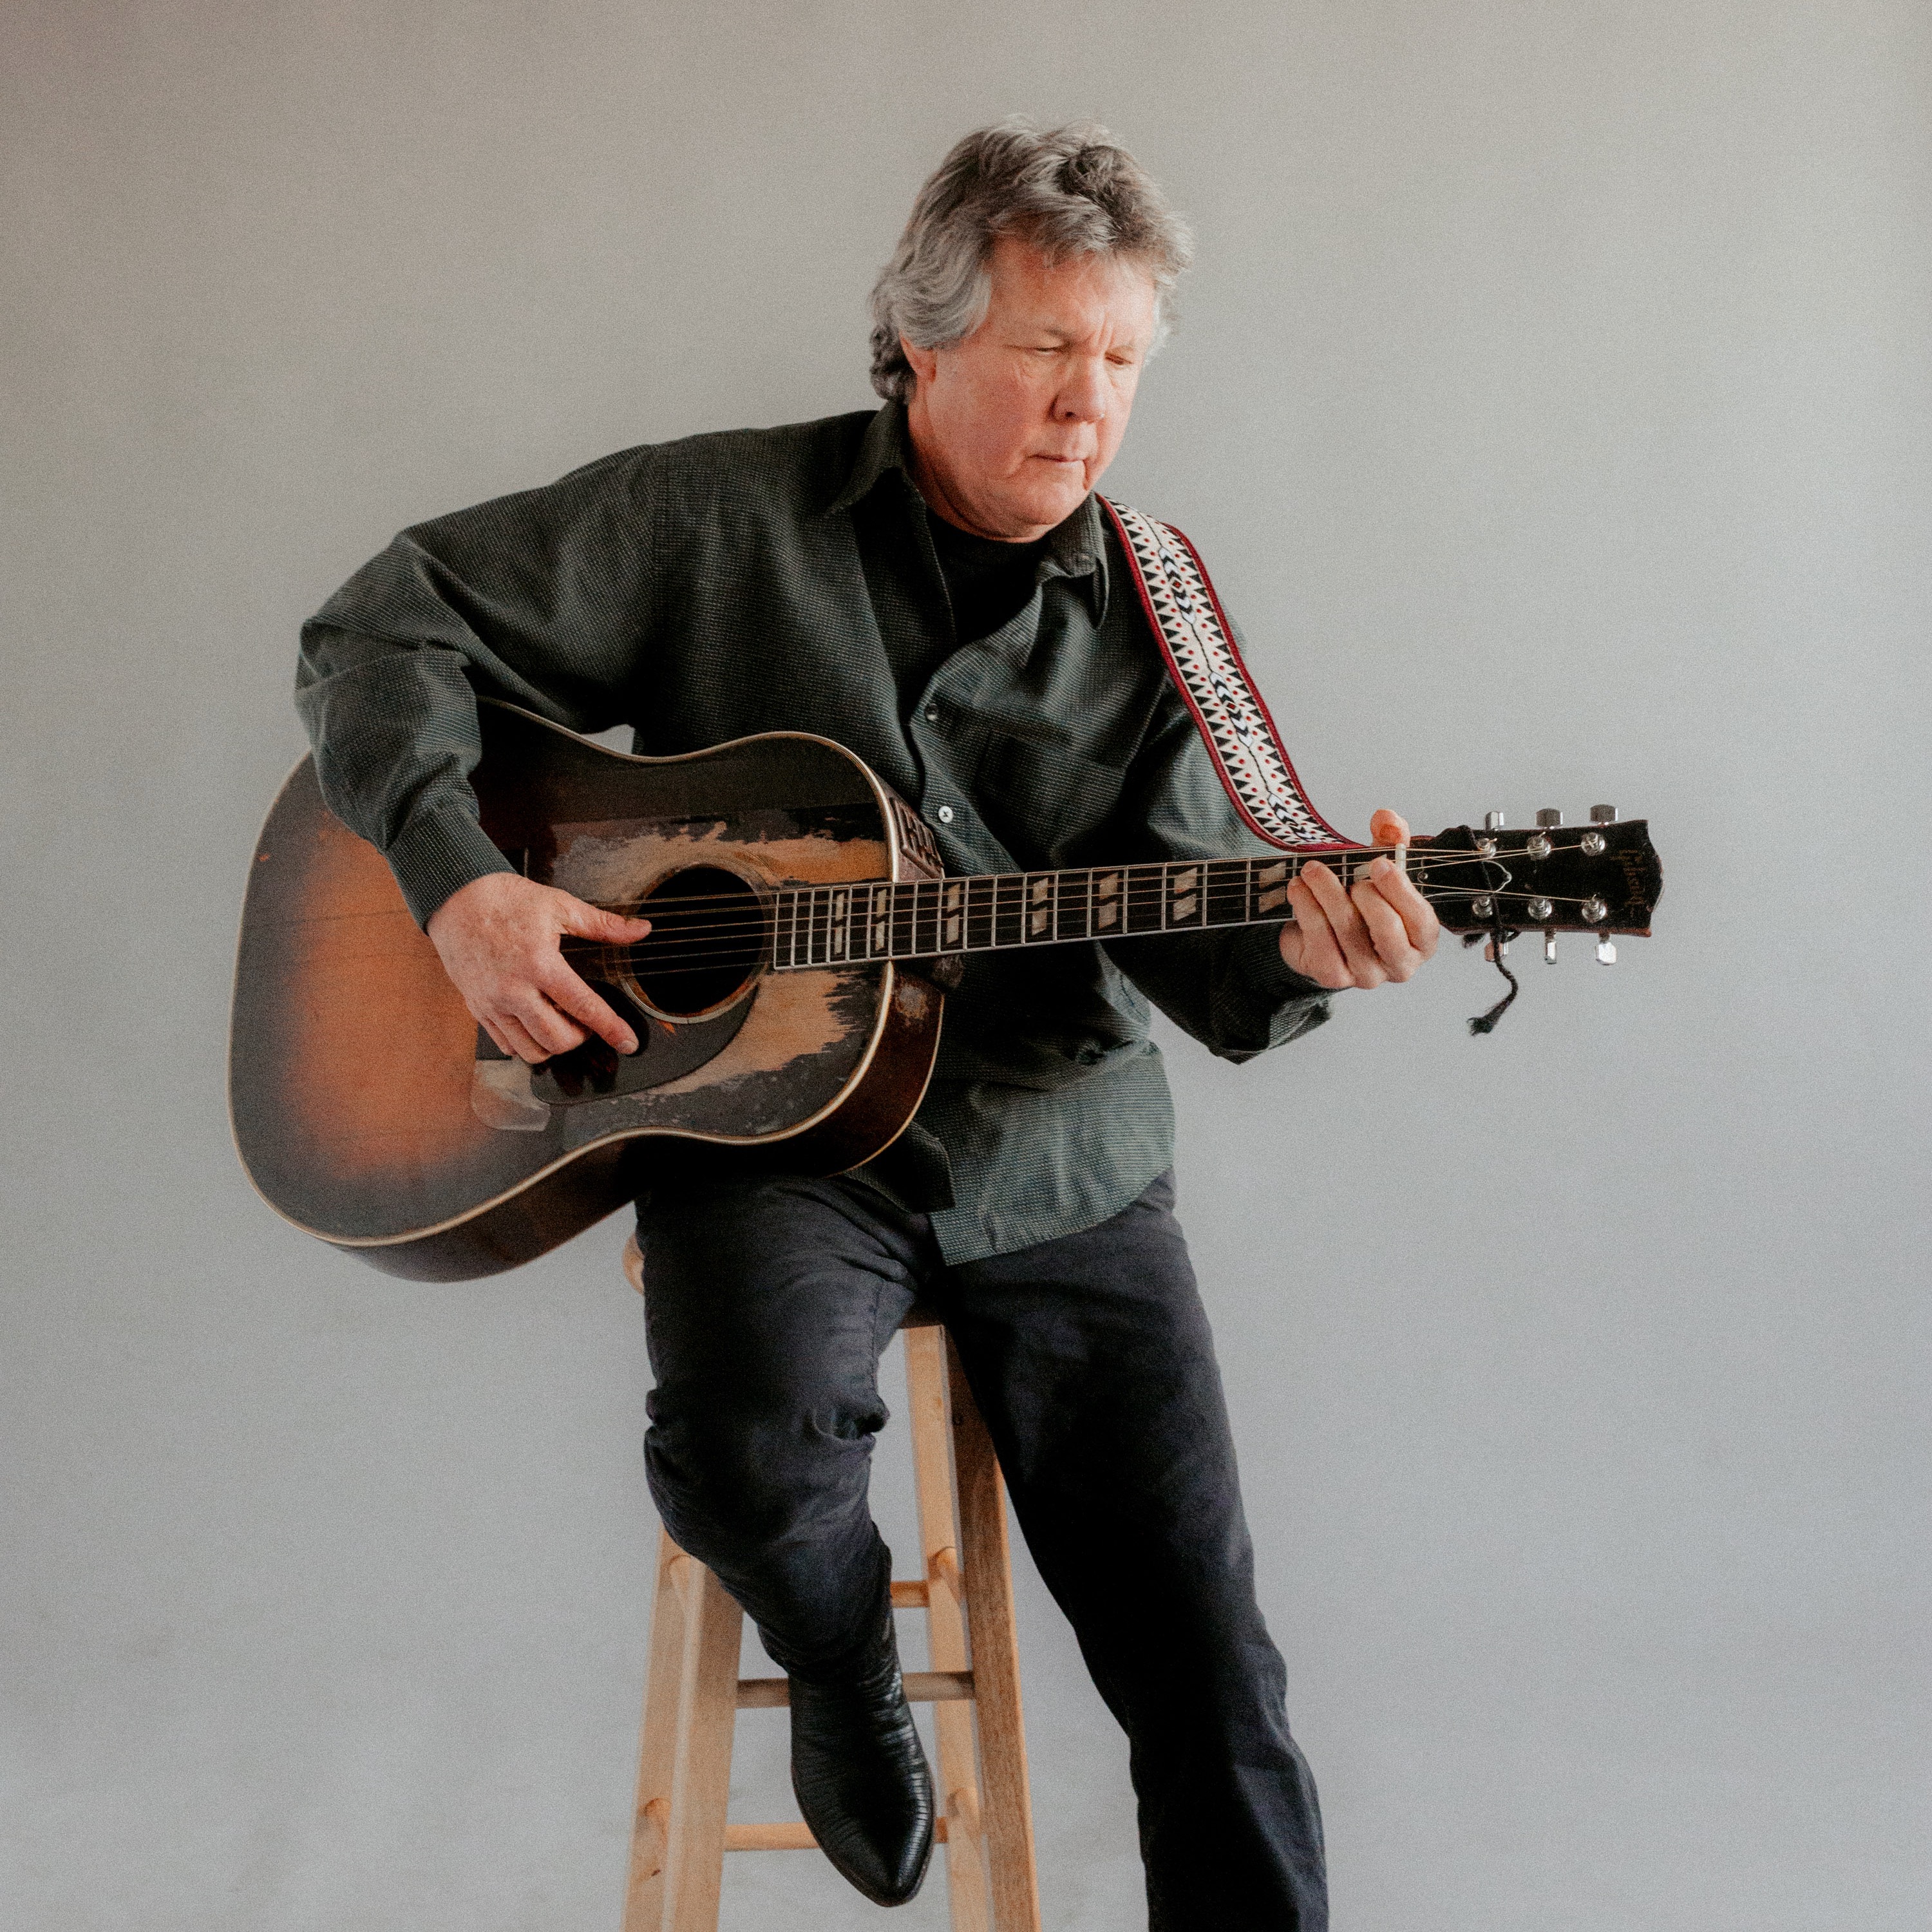 Steve Forbert On Revisiting His Iconic ‘Jackrabbit Slim’ For New ‘Live In Asbury Park’ Recording